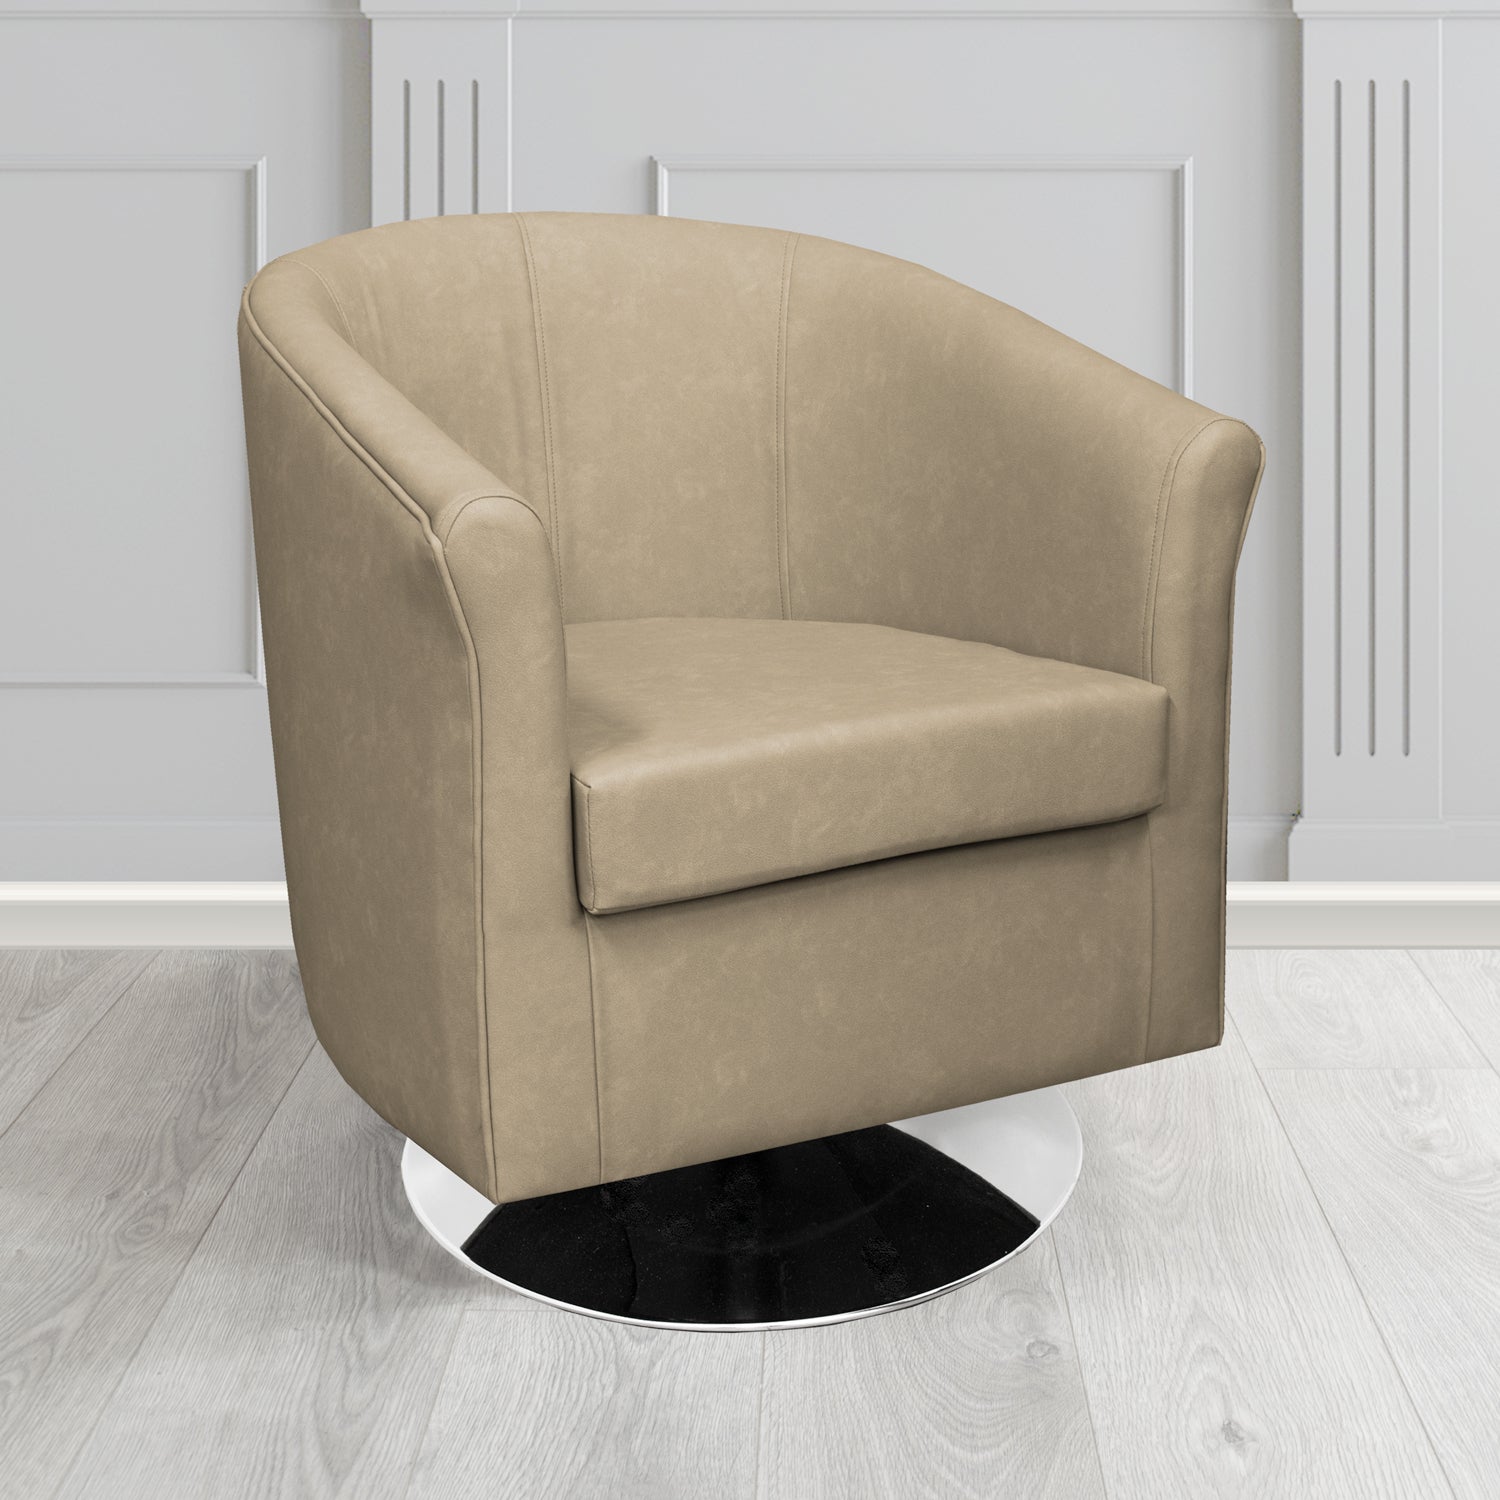 Tuscany Swivel Tub Chair in Infiniti Mousse INF1846 Antimicrobial Crib 5 Faux Leather - The Tub Chair Shop